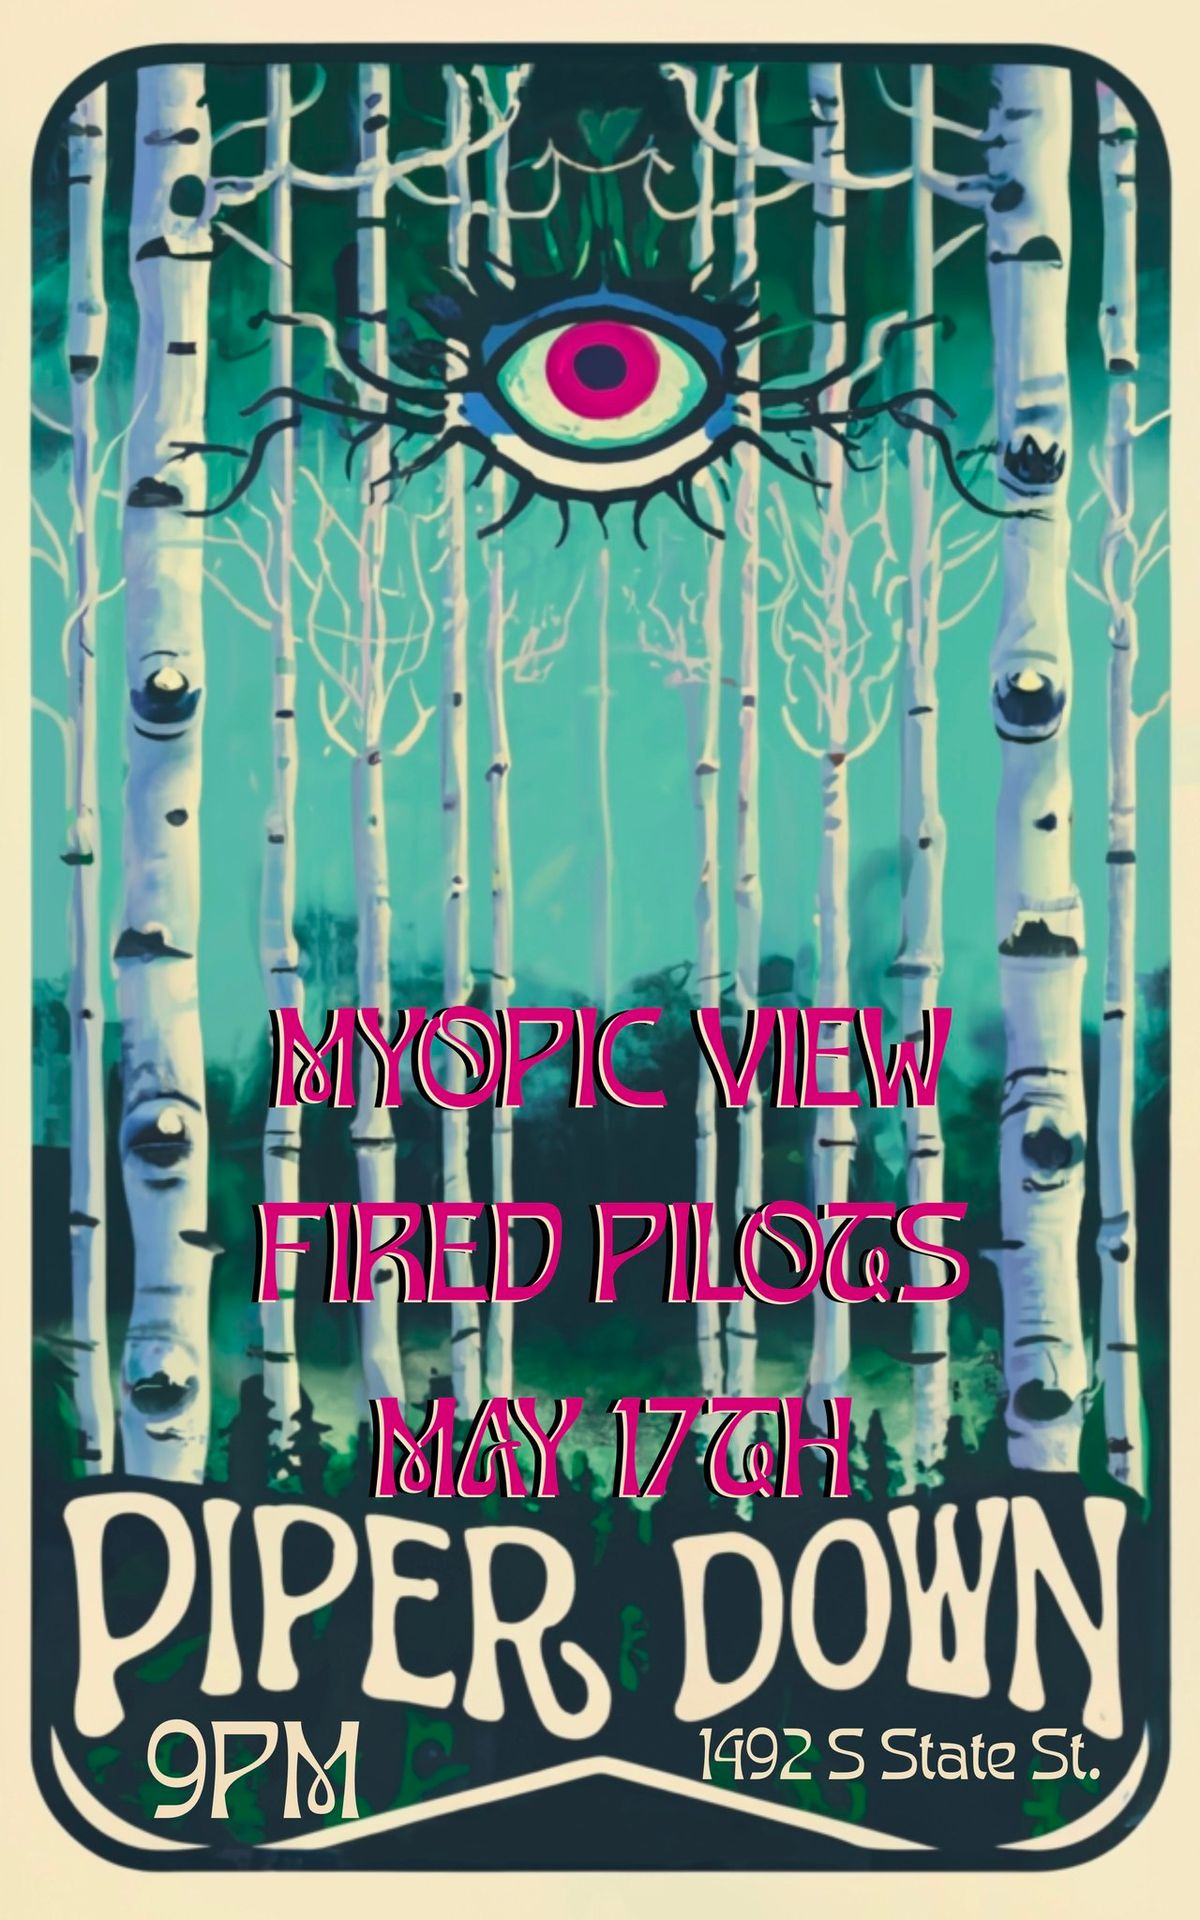 Myopic View with the Fired Pilots Live at Piper Down